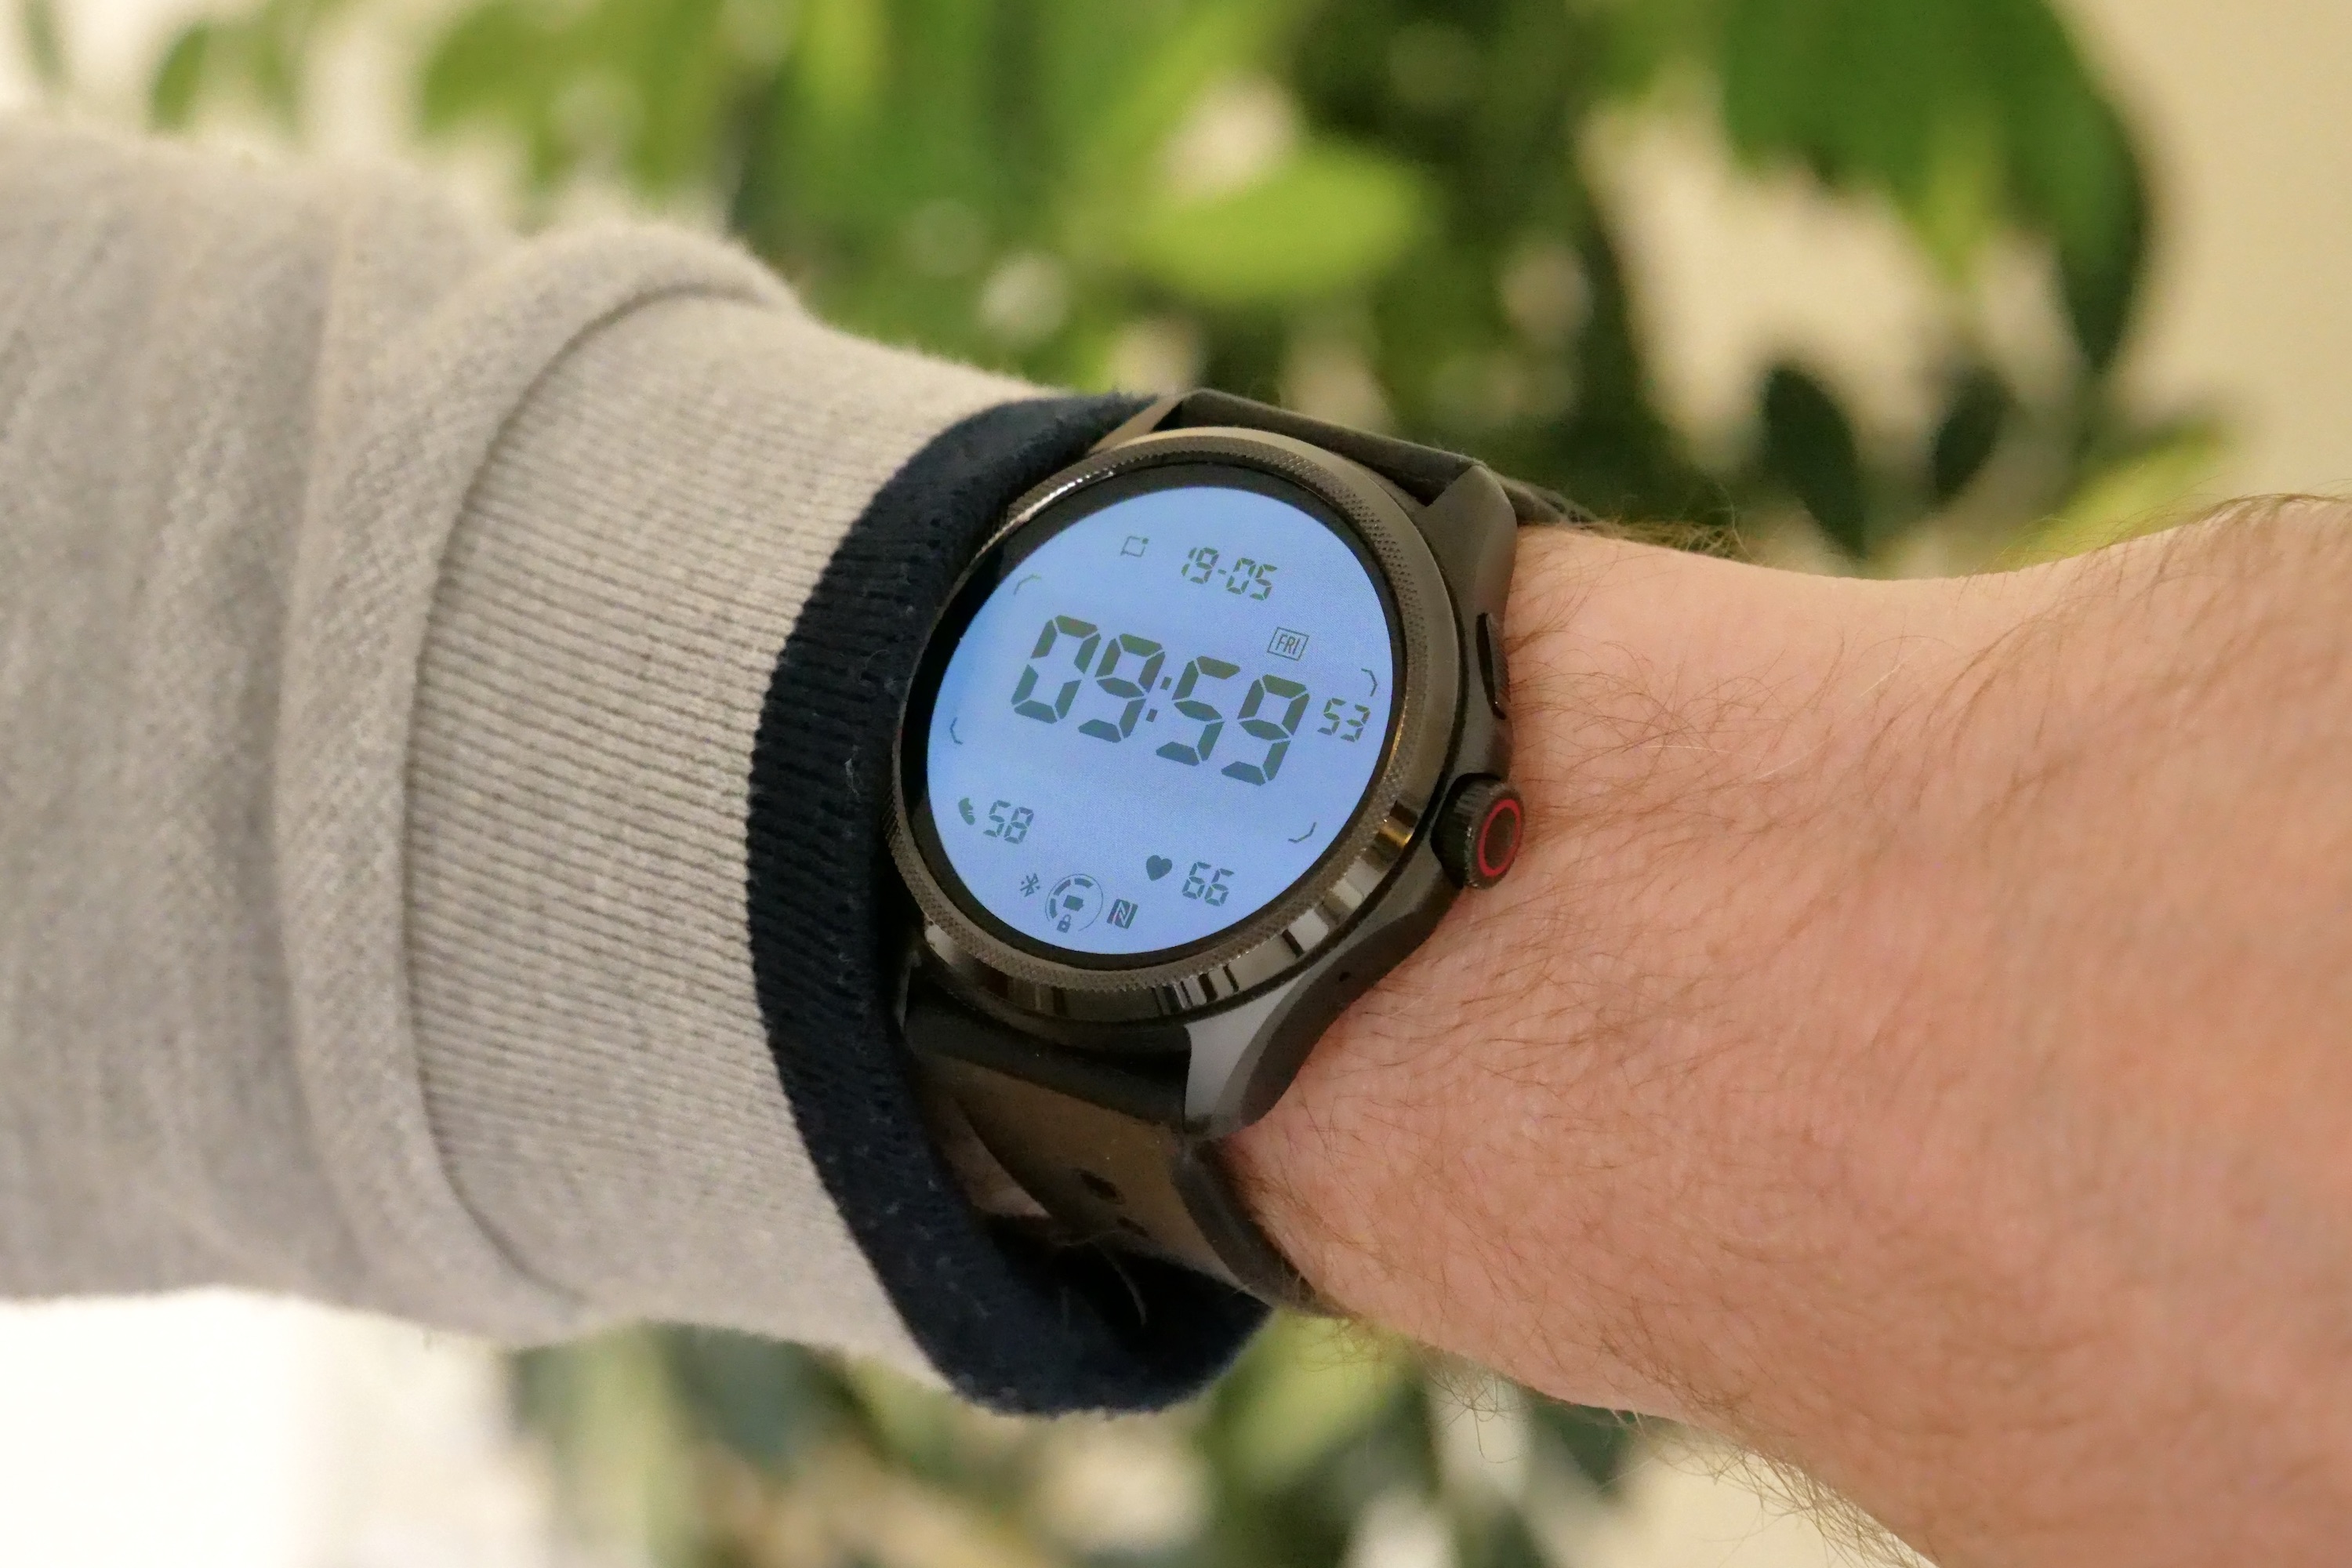 The Mobvoi TicWatch Pro 5 on a person's wrist, showing the backlit secondary screen.